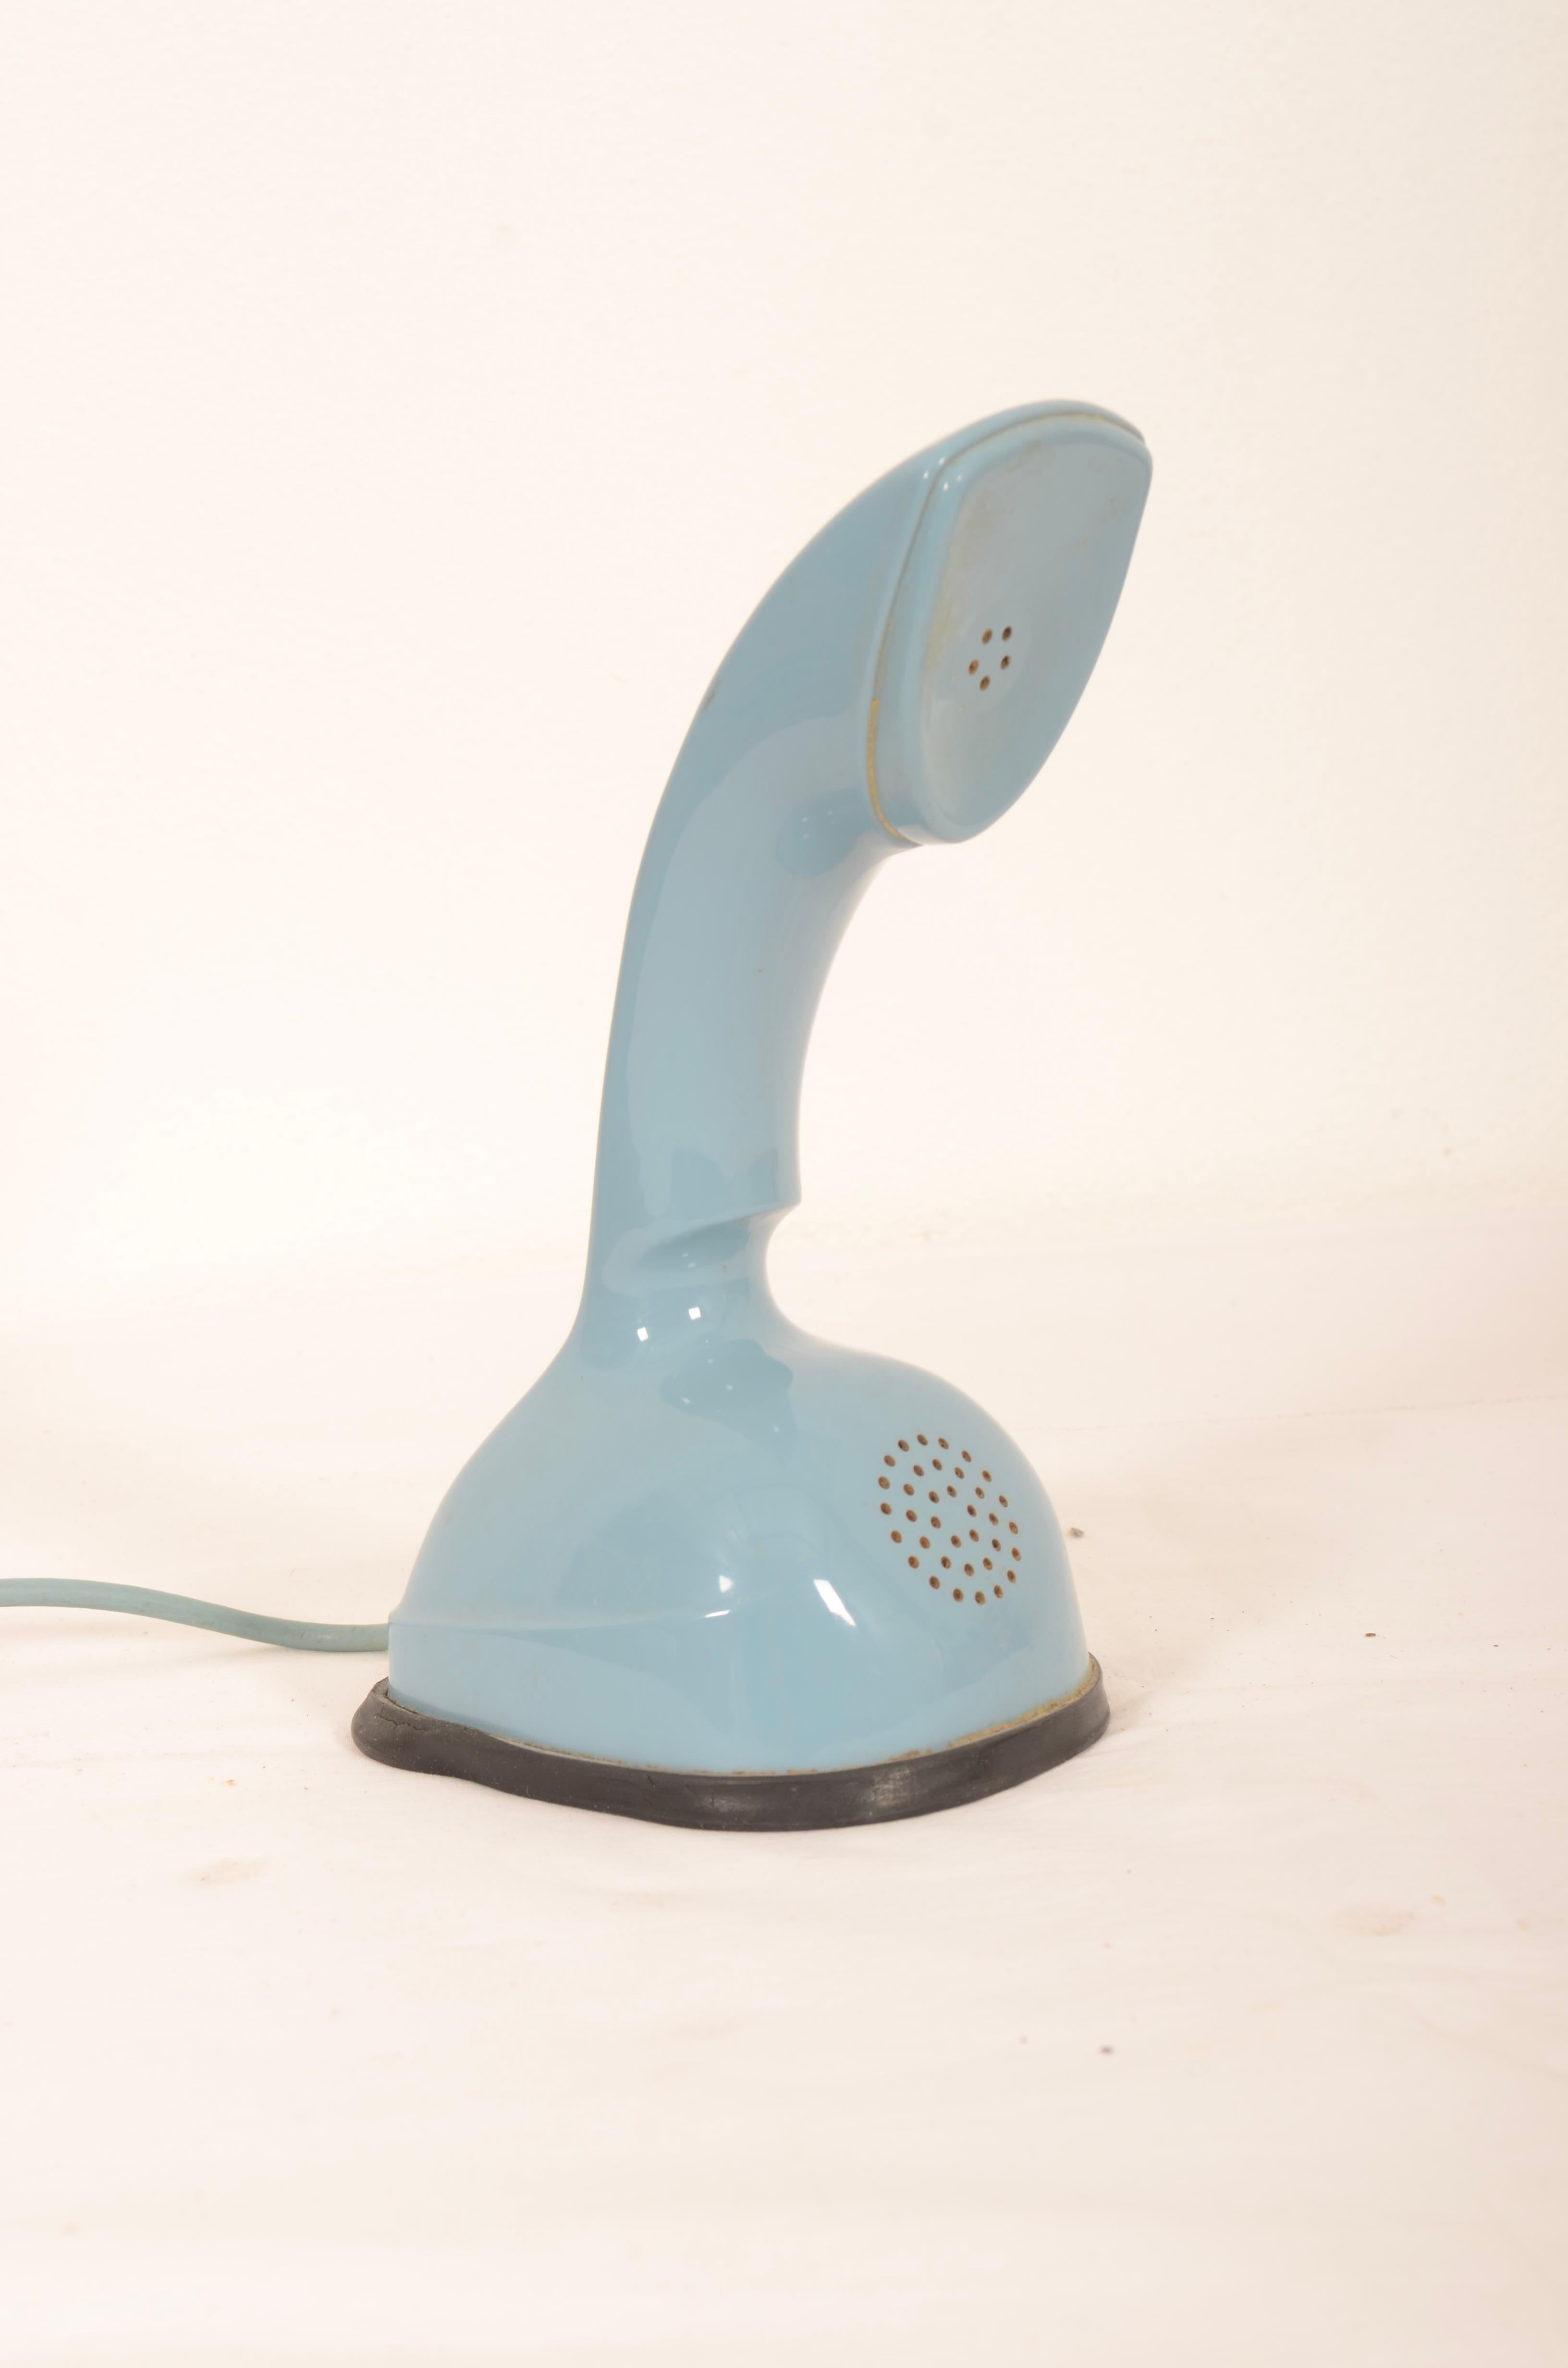 Vintage rotary dial mint green ericofone. This is the model Cobra. It is made of blue thermoplastic ABS
Designed in the 1950s in Sweden by Hugo Blomberg, Ralph Lysell and Gösta Thames, LM Ericsson.